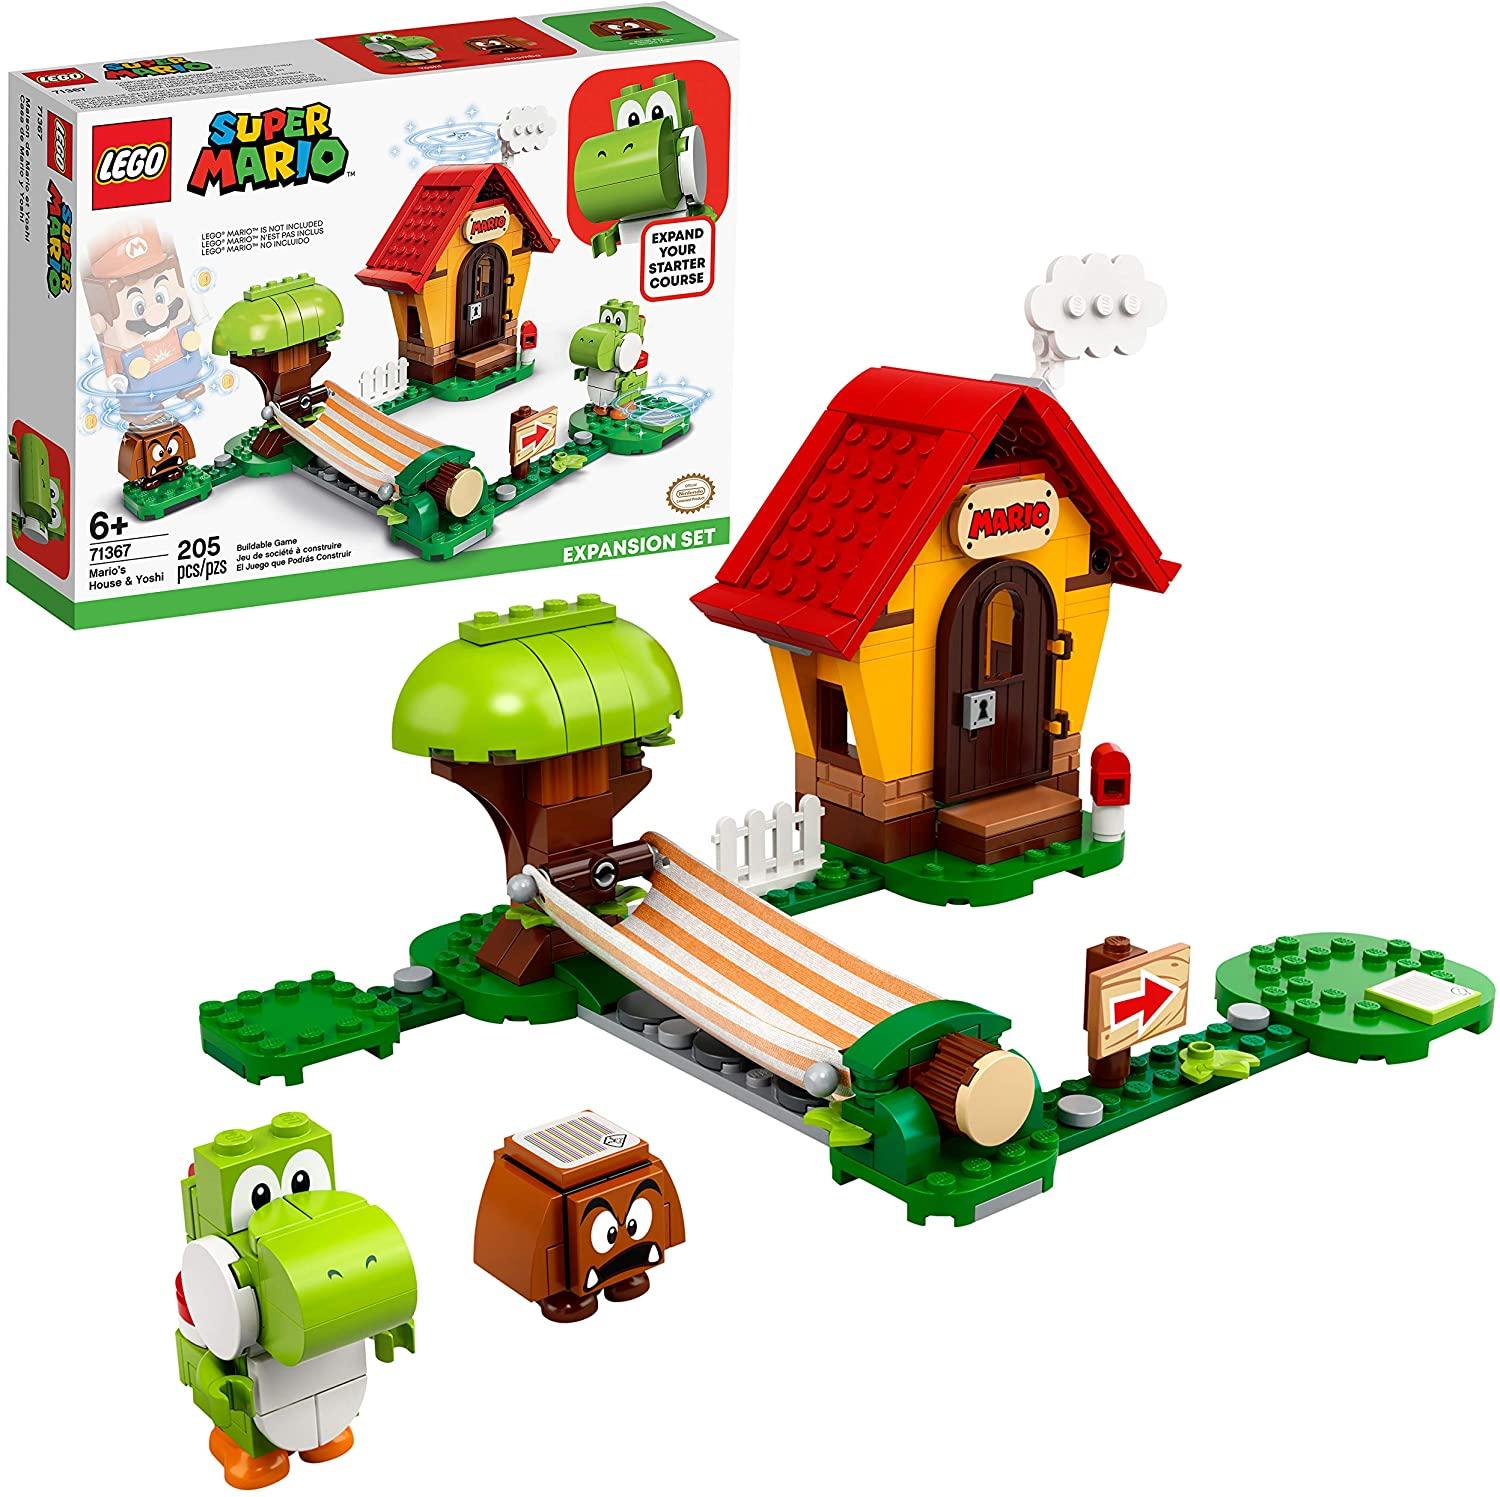 LEGO Super Mario's House and Yoshi Expansion Building Kit for $19.63